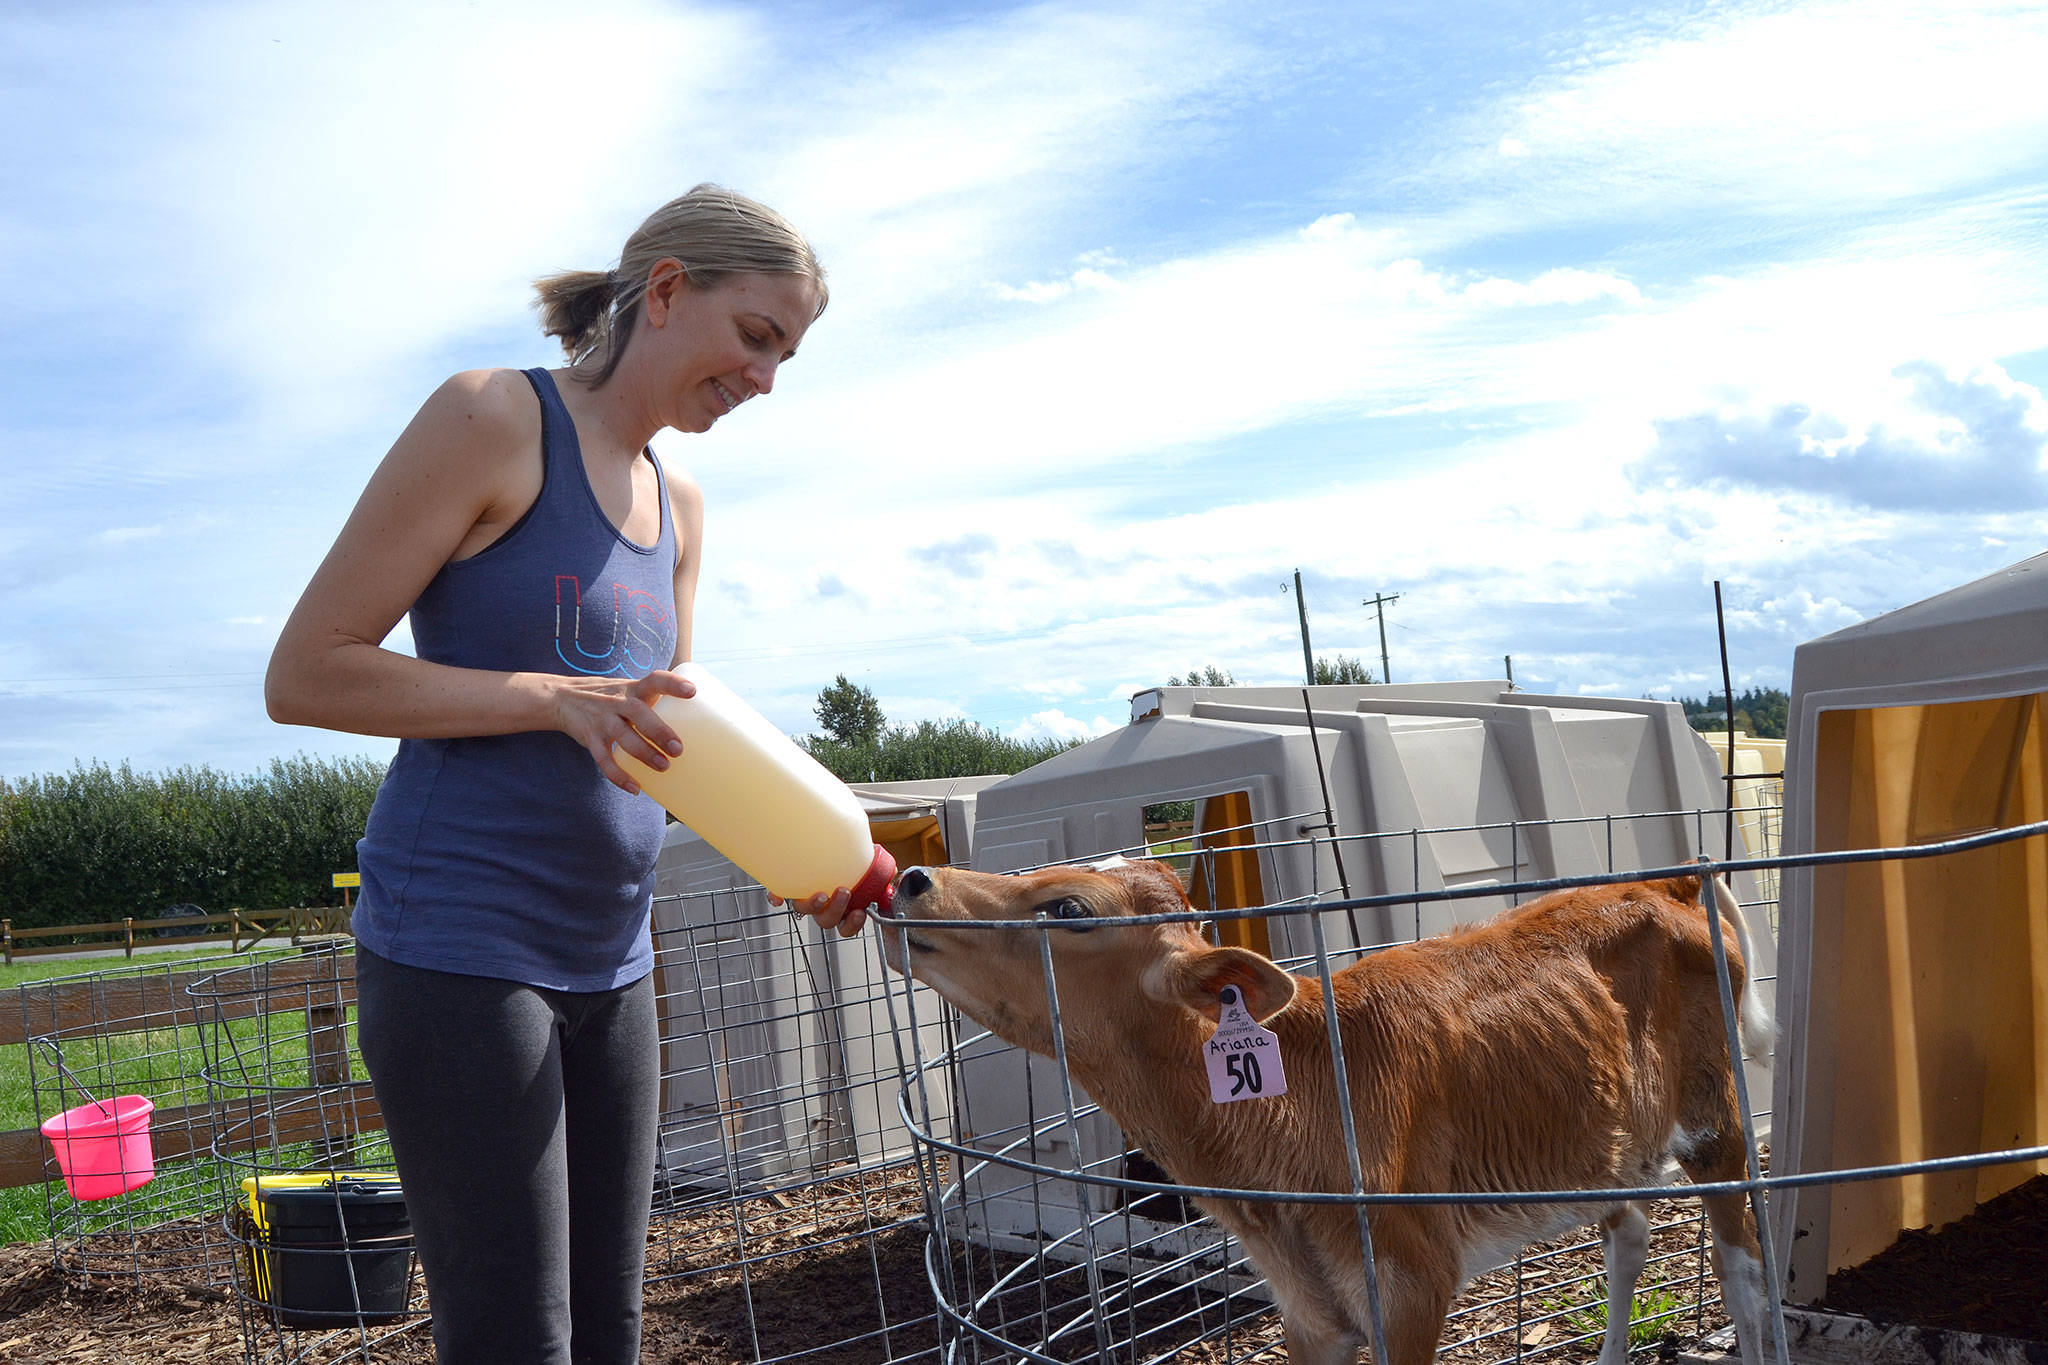 Sarah McCarthey, co-owner of Dungeness Valley Creamery, feeds water to Ariana the cow to increase its electrolytes. Eventually, the cow will grow to produce raw milk for the farm, which offers milk, cream, ice cream and more. Sequim Gazette photo by Matthew Nash